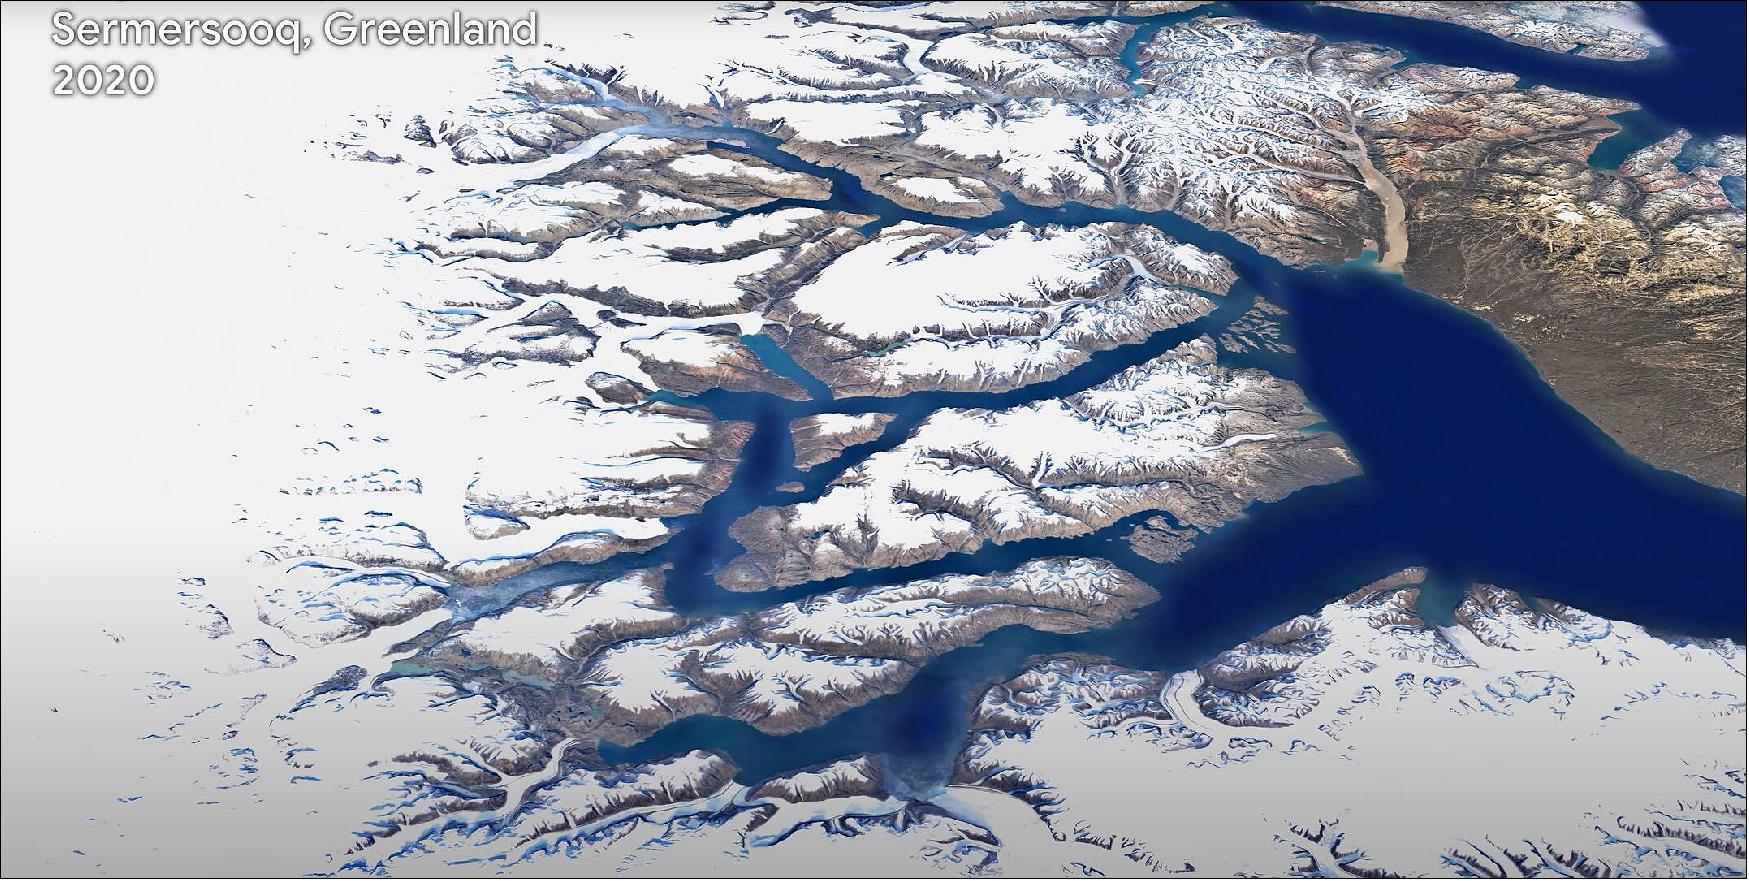 Figure 1: Sermersooq, Greenland. One of the most comprehensive pictures of our changing planet is now available to the public. Thanks to the close collaboration between Google Earth, ESA, the European Commission, NASA and the US Geological Survey, 24 million satellite photos from the past 37 years have been embedded into a new layer of Google Earth – creating a new, explorable view of time on our planet [image credit: Google Earth Timelapse (Google, Landsat, Copernicus)]